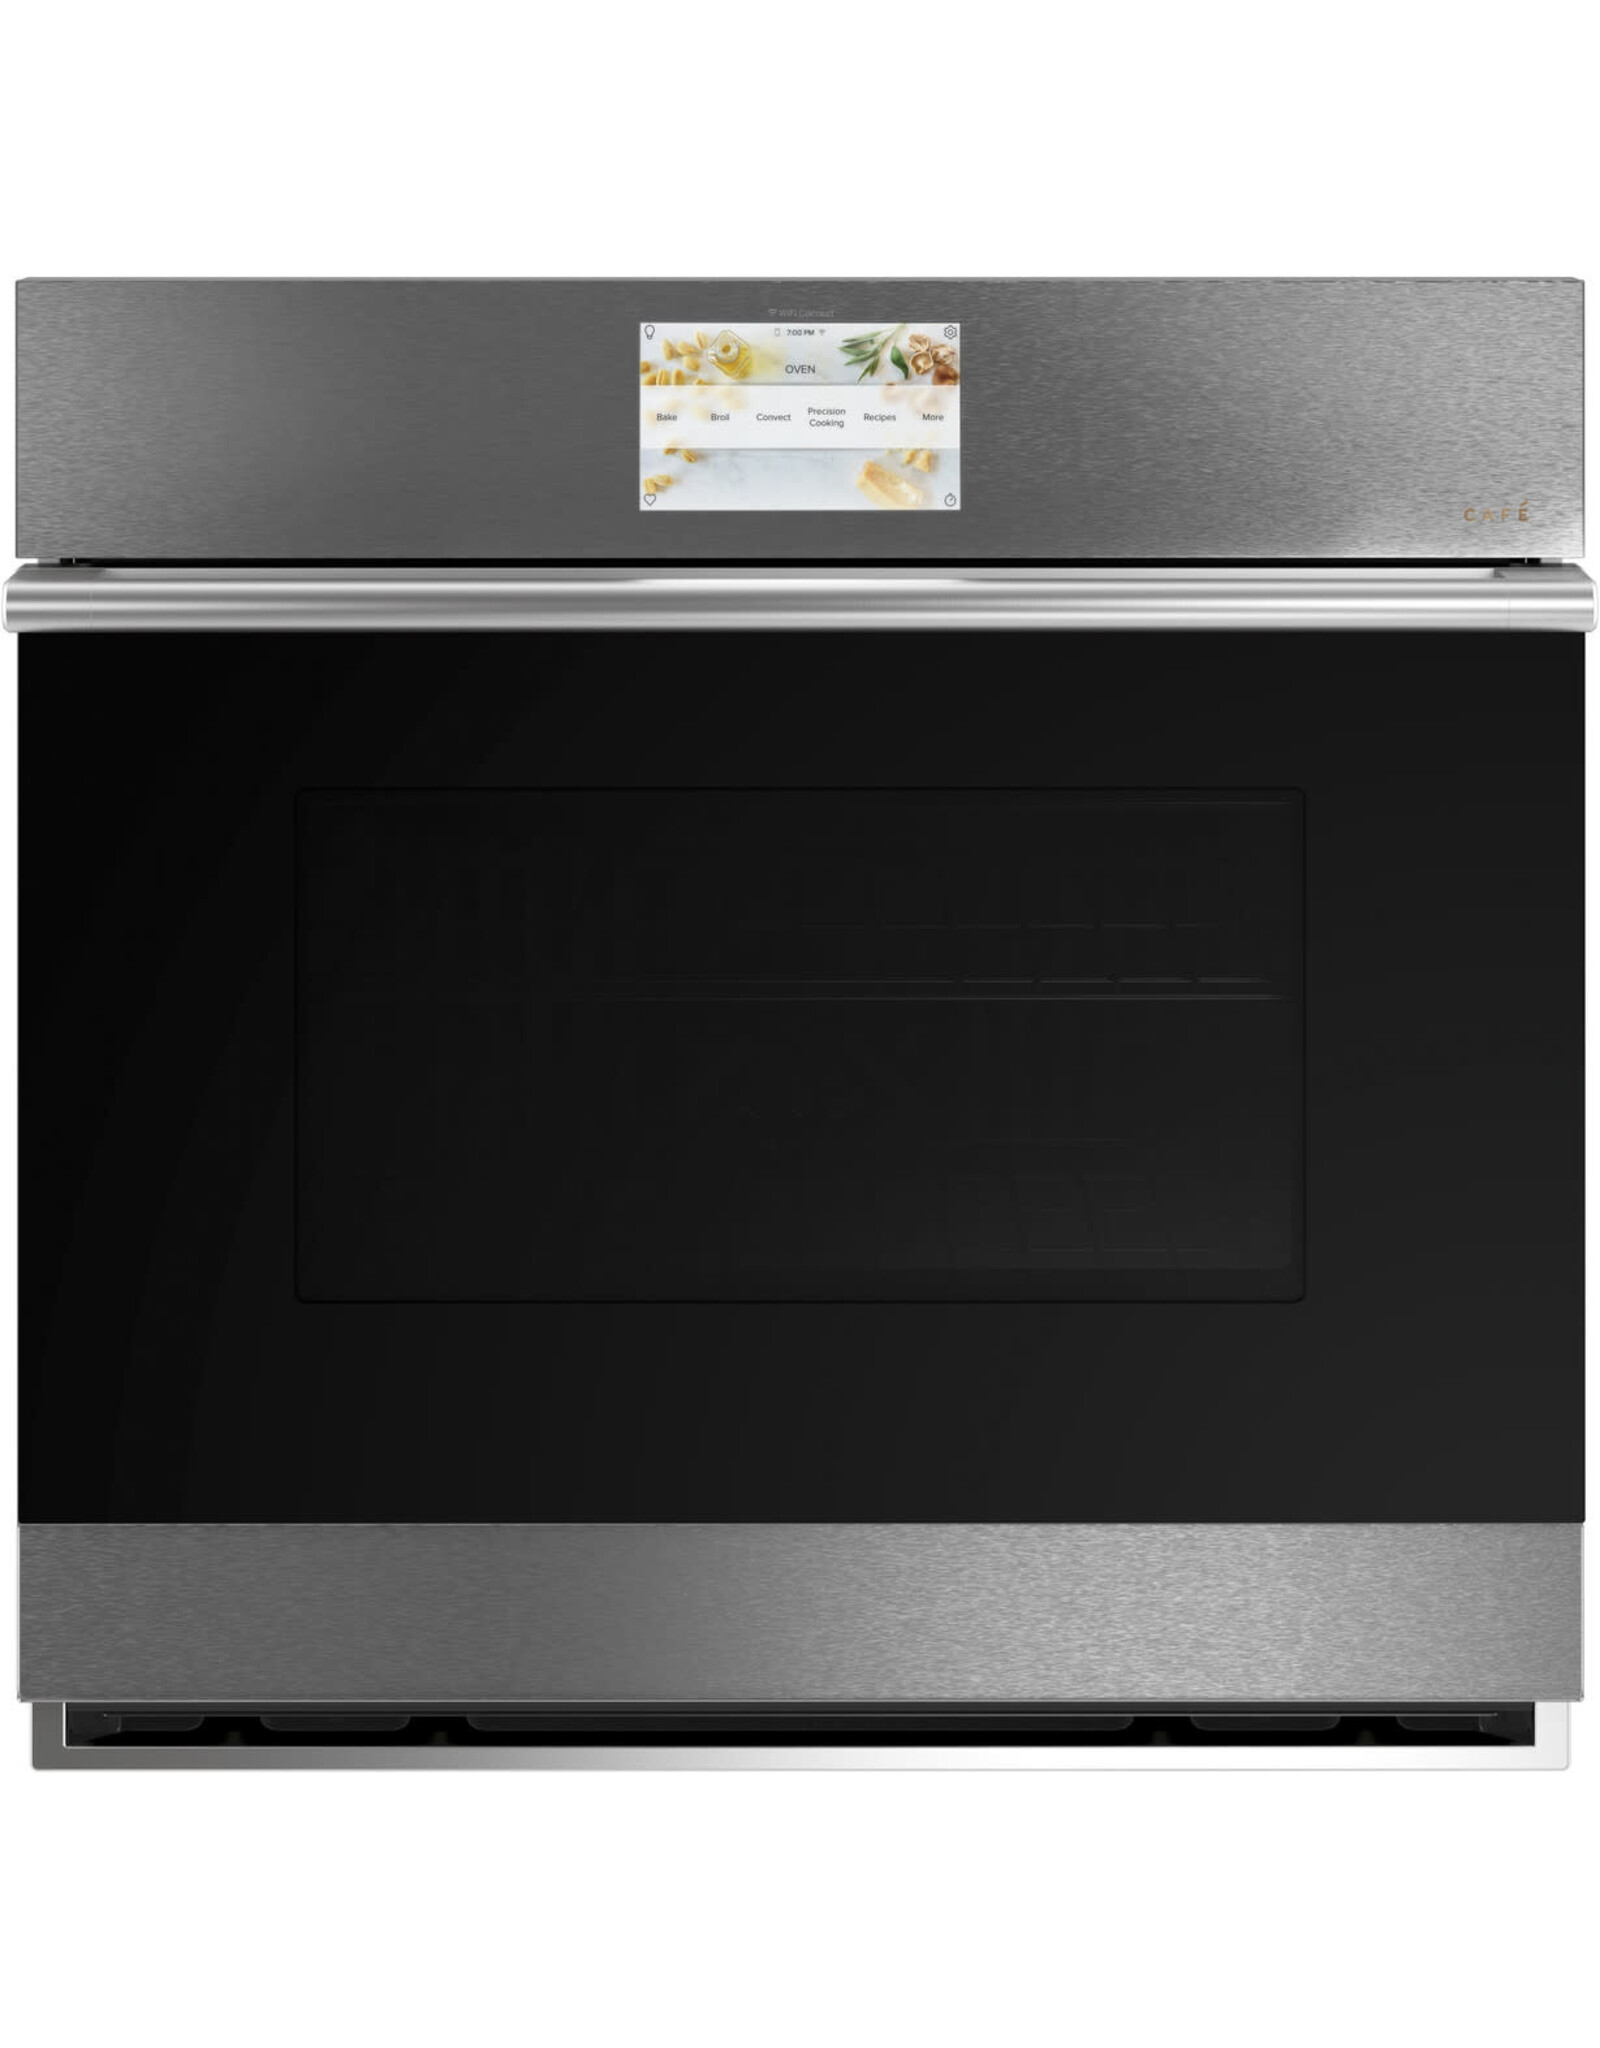 Cafe' CTS70DM2N2S5 Café™ 30" Smart Single Wall Oven with Convection in Platinum Glass